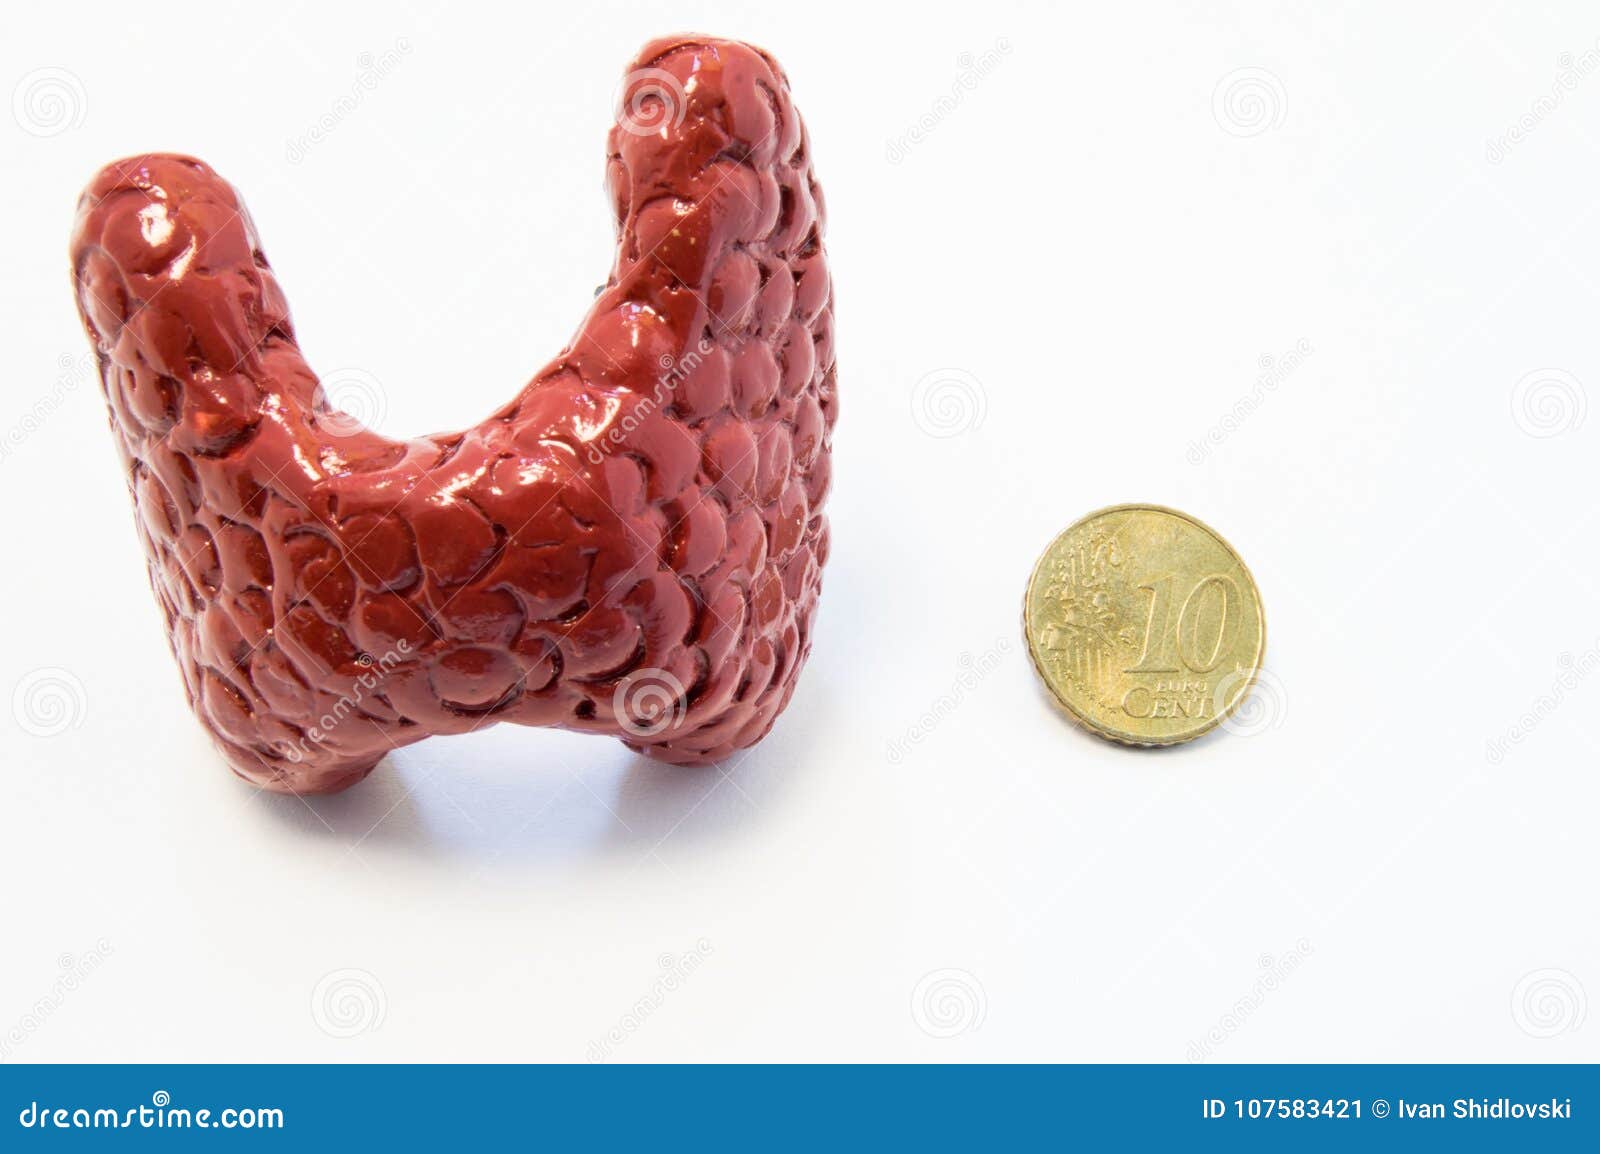 concept of visualization of enlarged thyroid gland in various diseases, such as goiter, thyroiditis, nodule. anatomical model of t